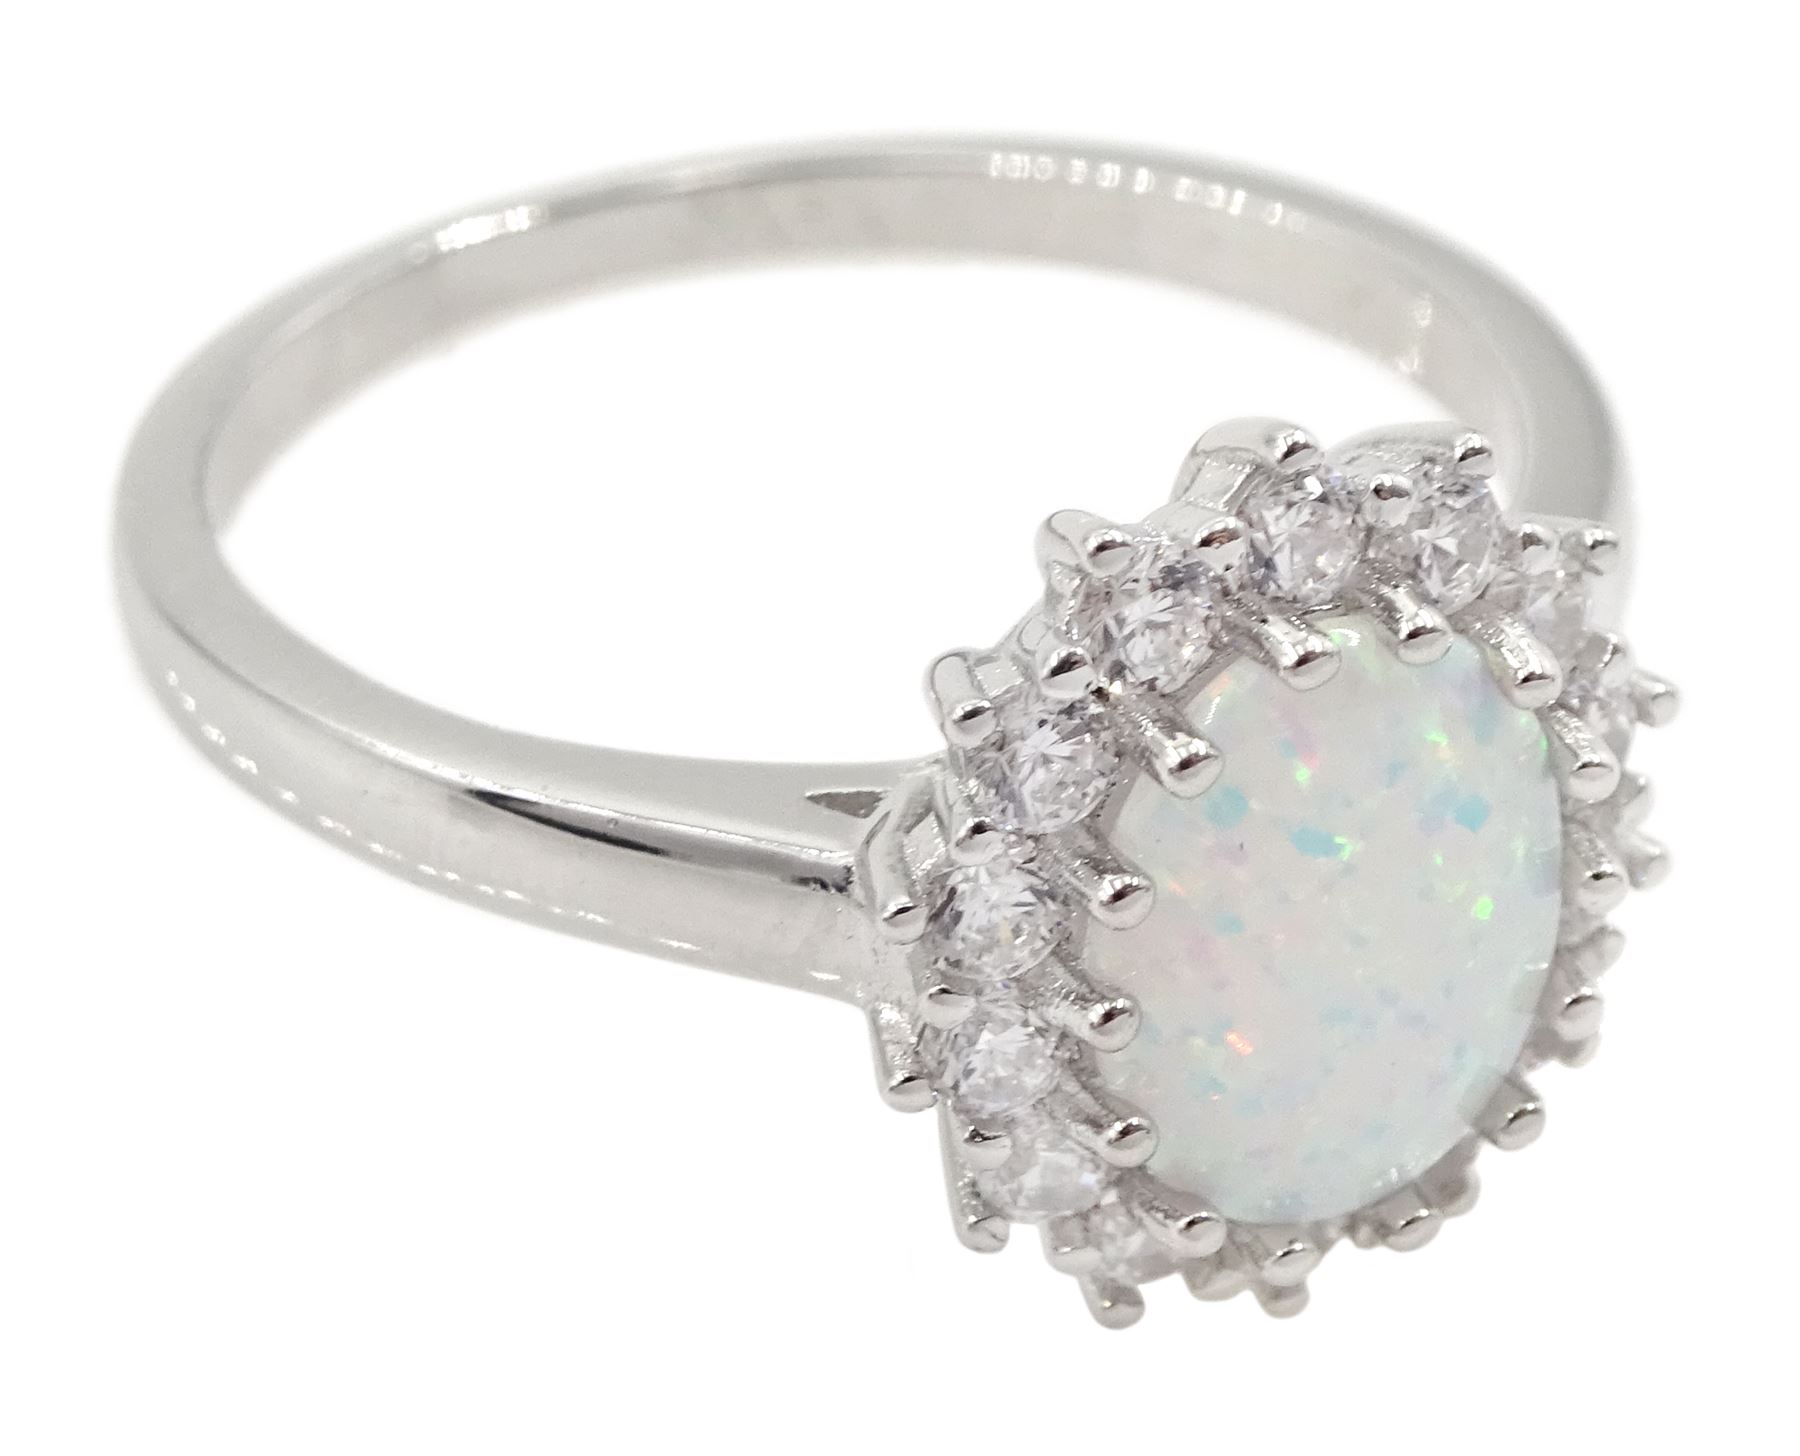 Silver opal and cubic zirconia cluster ring - Image 3 of 4